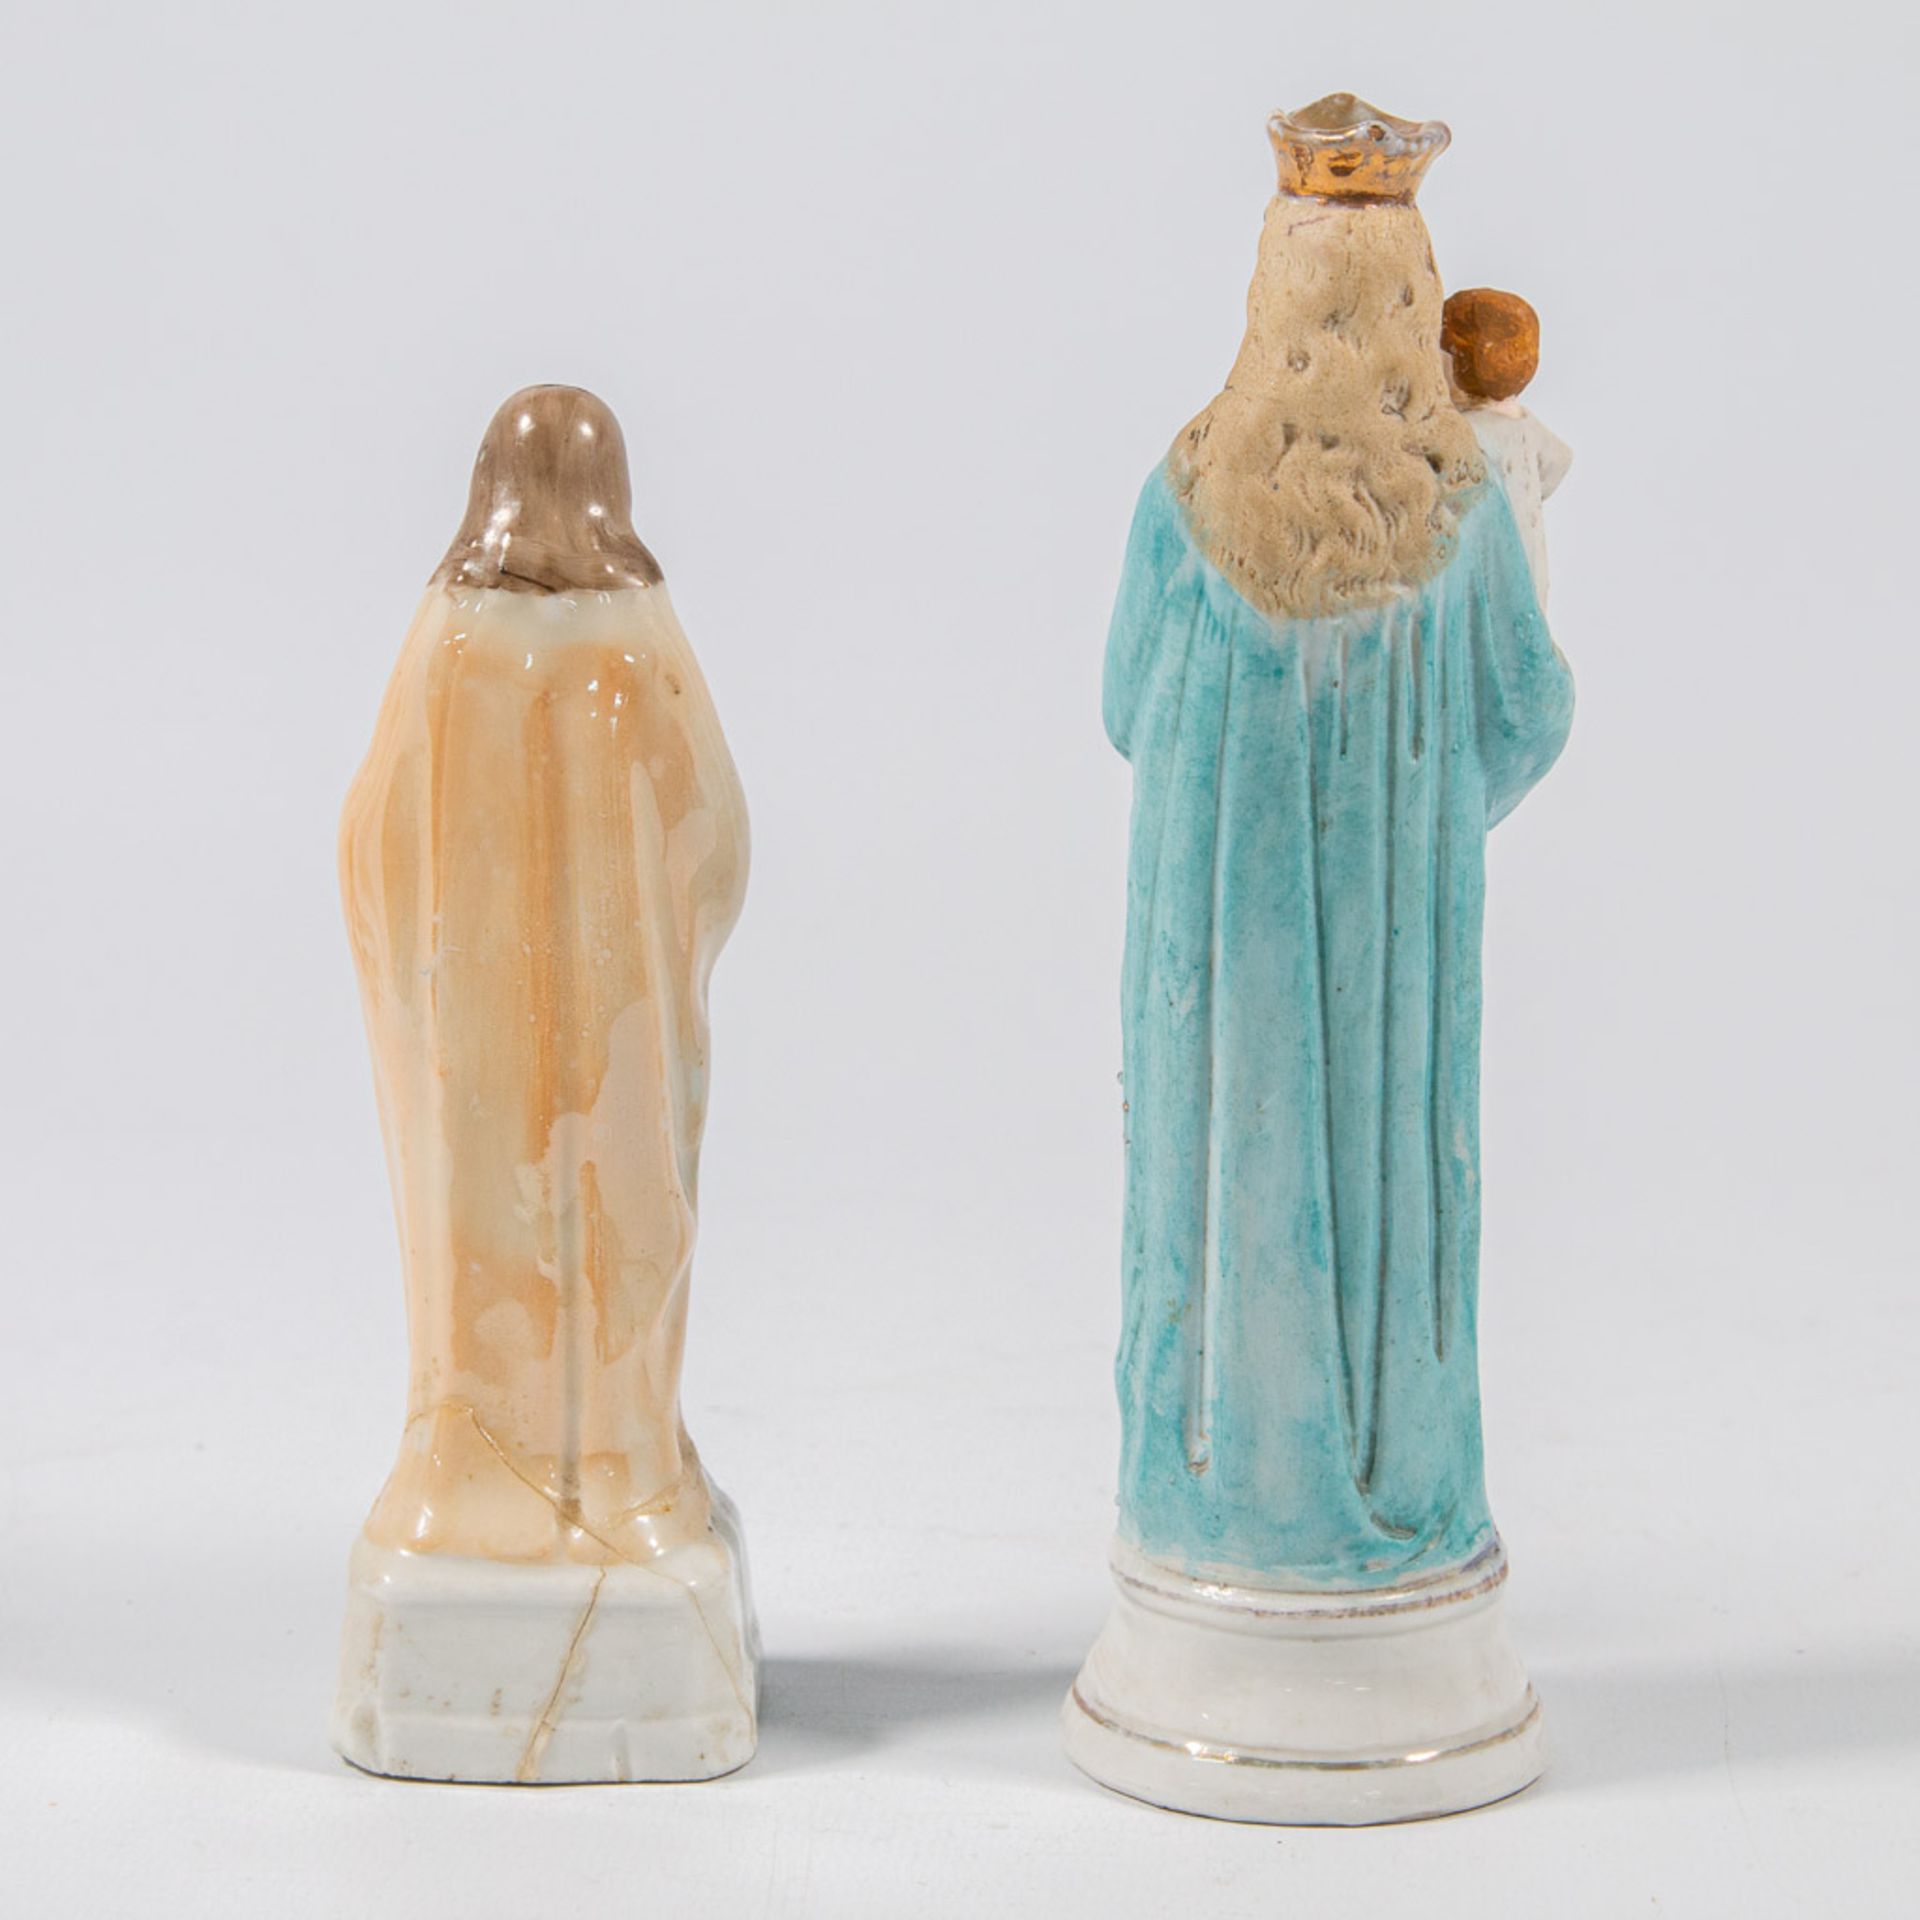 A collection of 11 bisque porcelain holy statues, Mary, Joseph, and Madonna. - Image 19 of 49